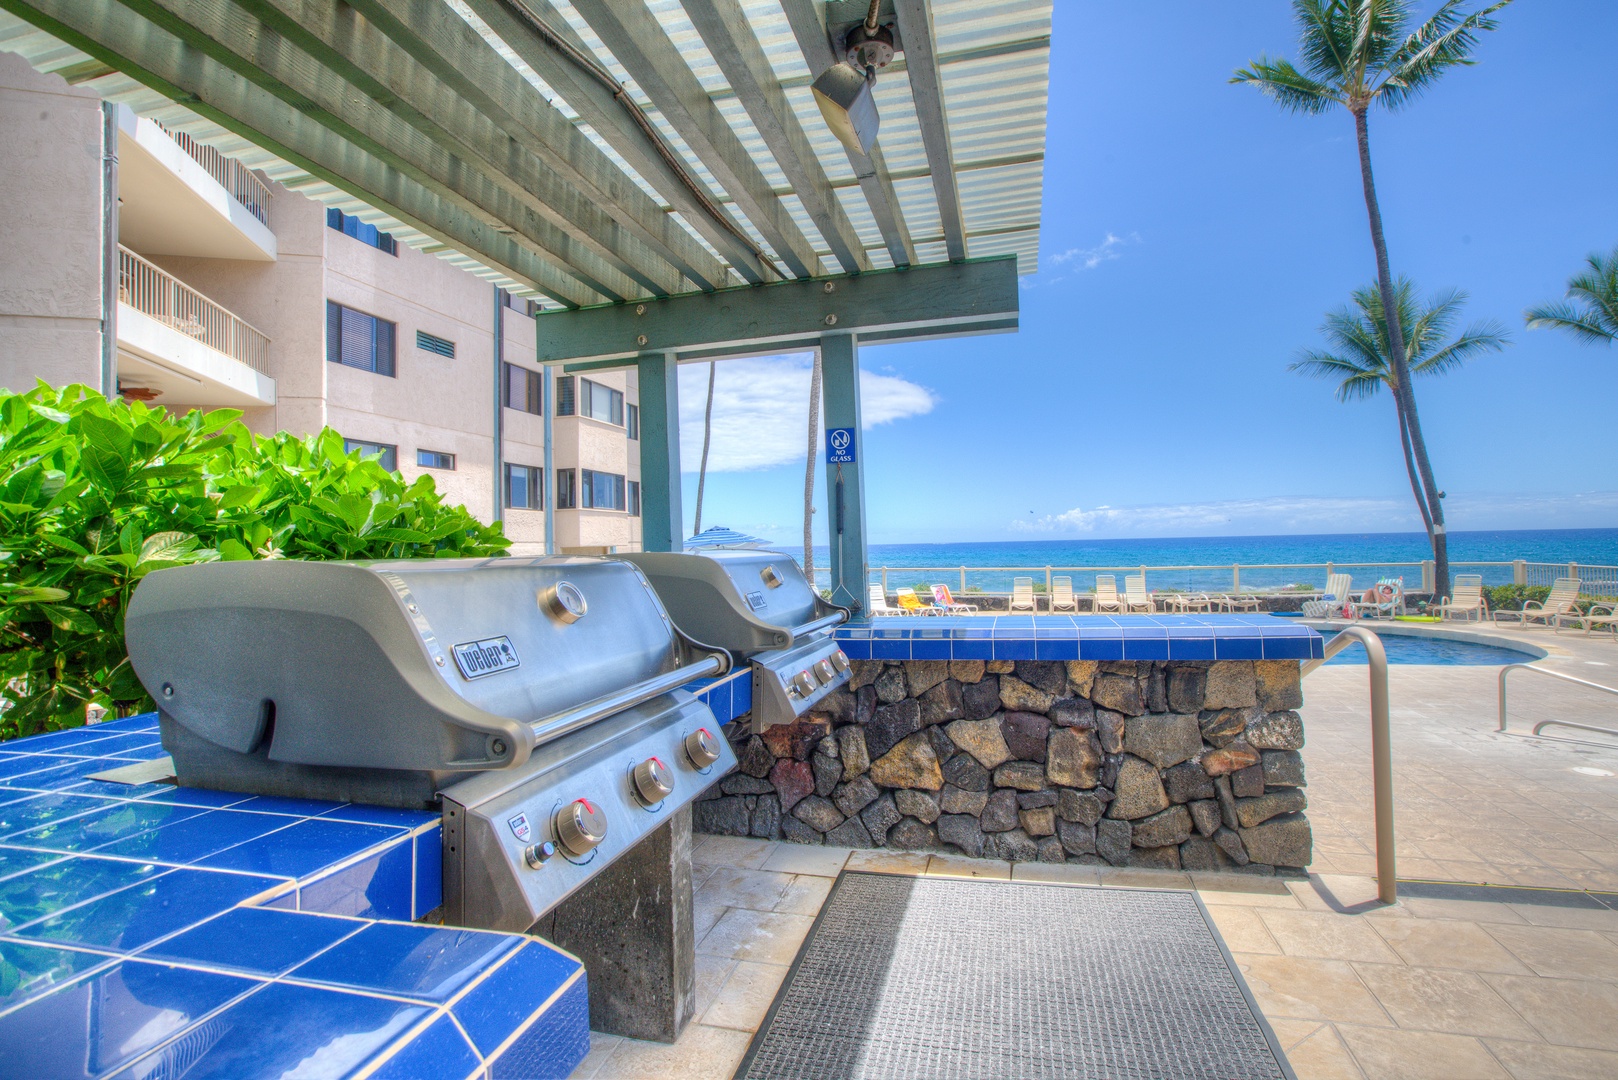 Kailua Kona Vacation Rentals, Kona Reef F11 - Barbecue Facilities and Pavilion located adjacent to the Oceanfront Pool.